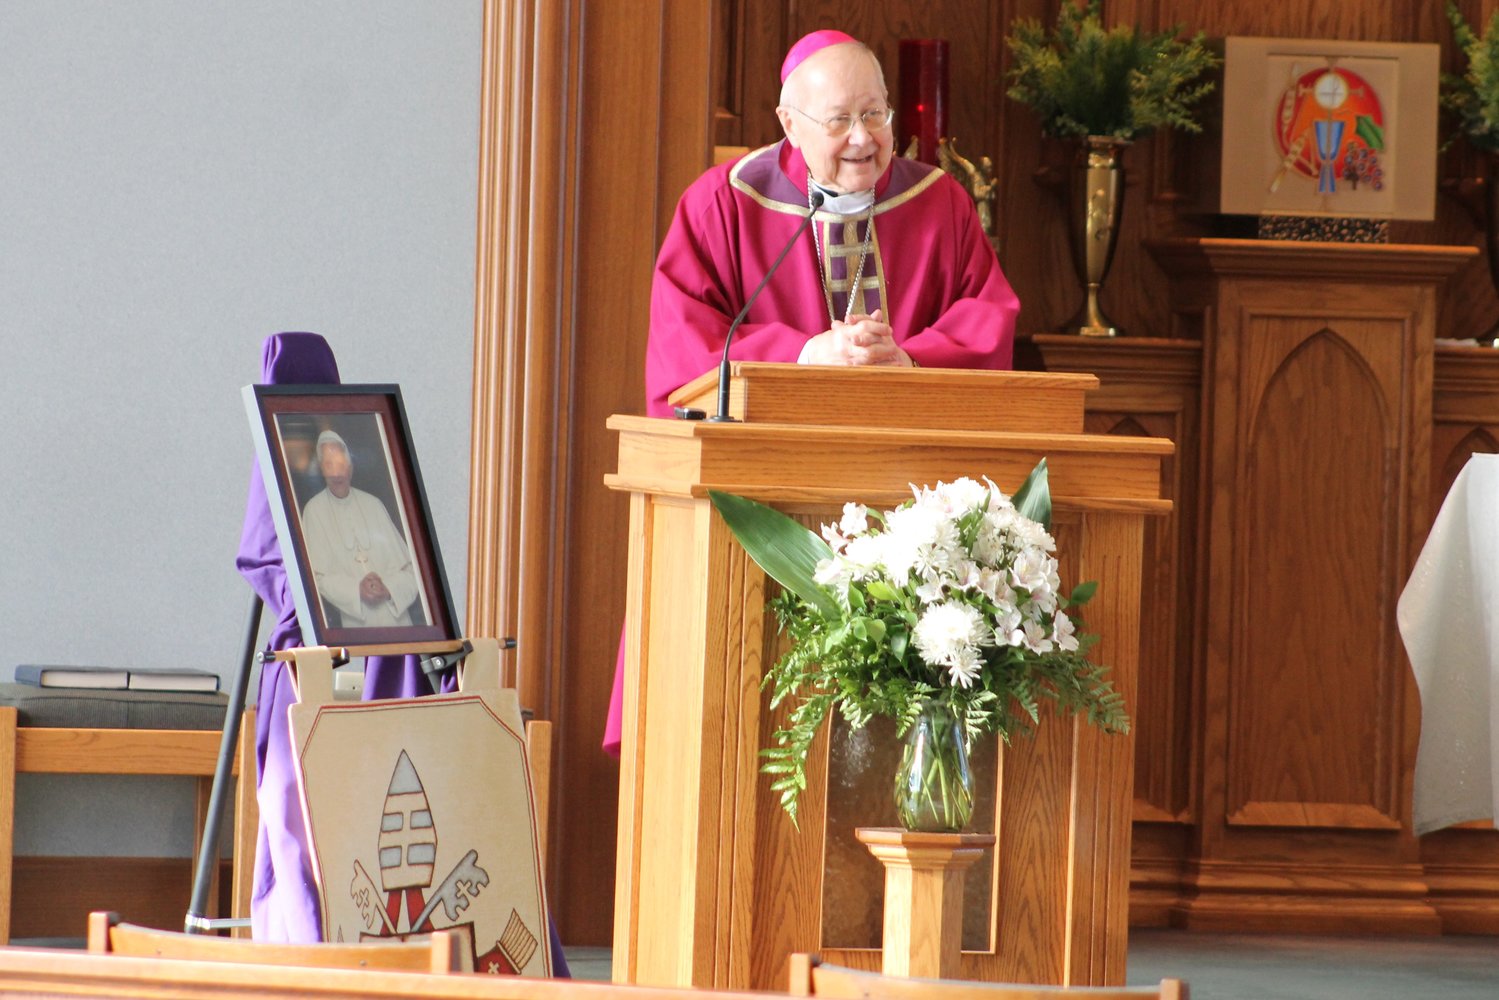 Bishop Emeritus John R. Gaydos, who led the Jefferson City diocese from 1997 to 2018, preaches the homily during the See City Deanery’s Memorial Mass for Pope Emeritus Benedict XVI on Jan. 6 in St. Andrew Church in Holts Summit.